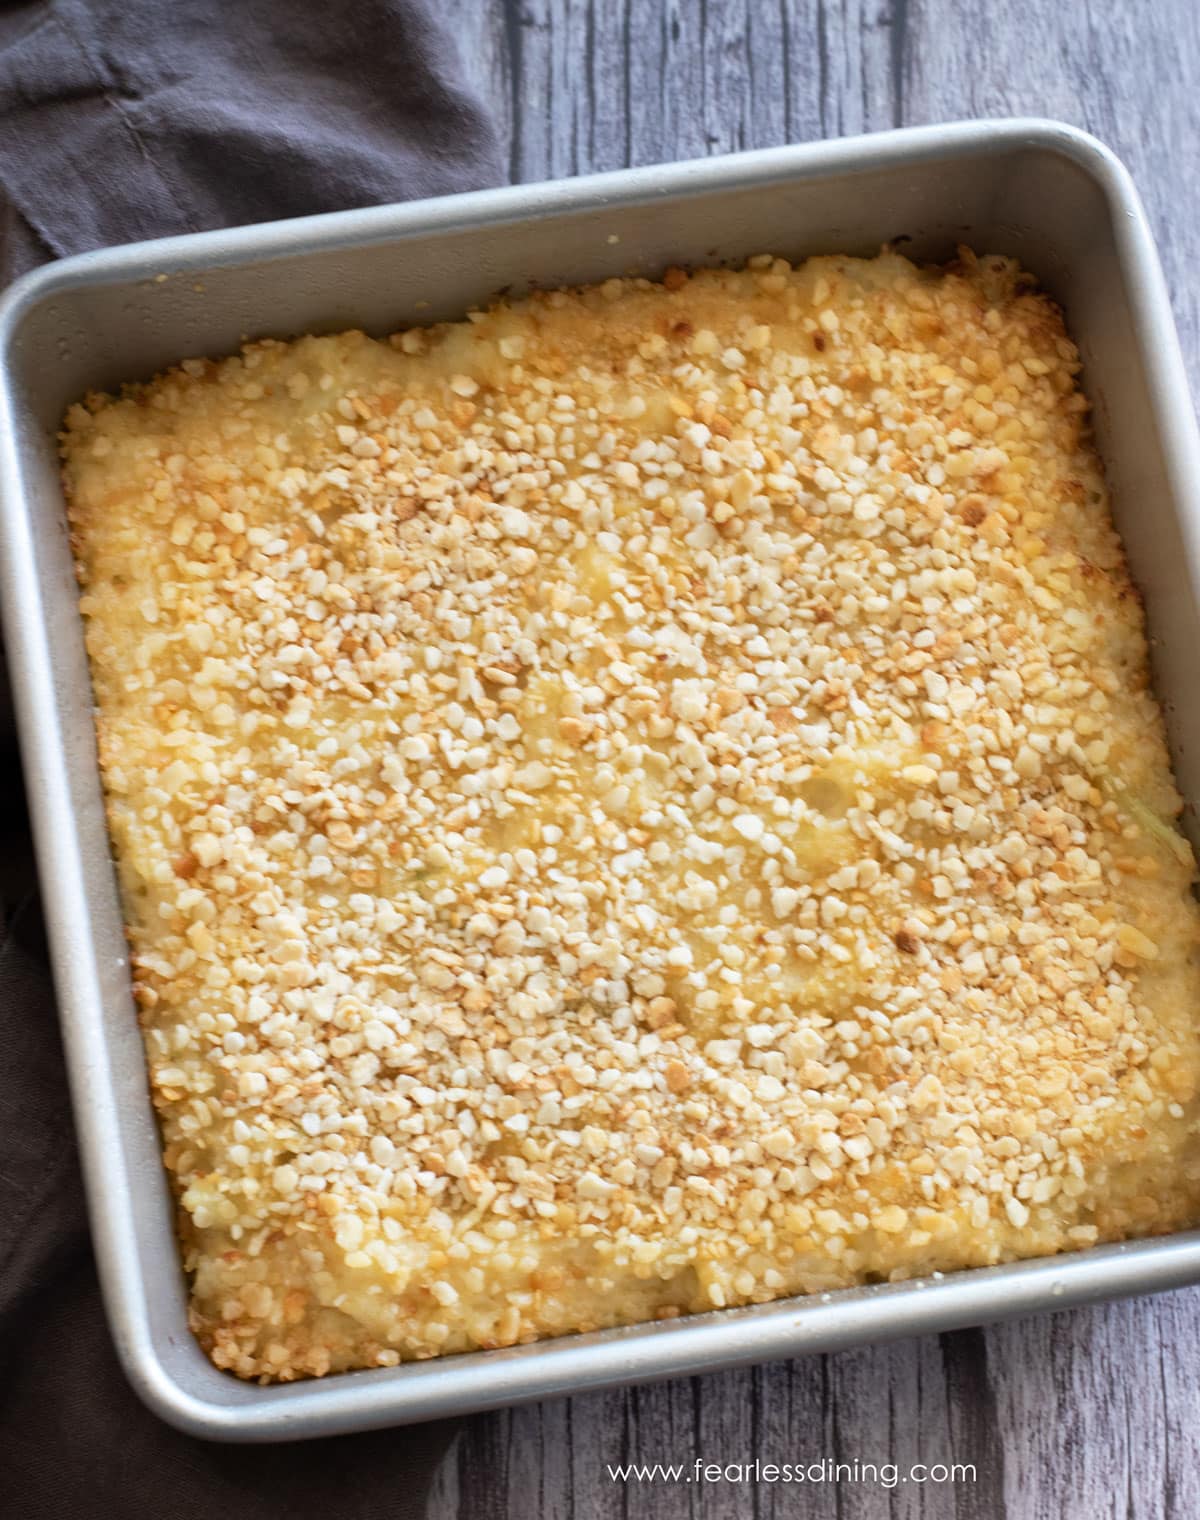 The top view of a baking dish full of mashed cauliflower gratin.